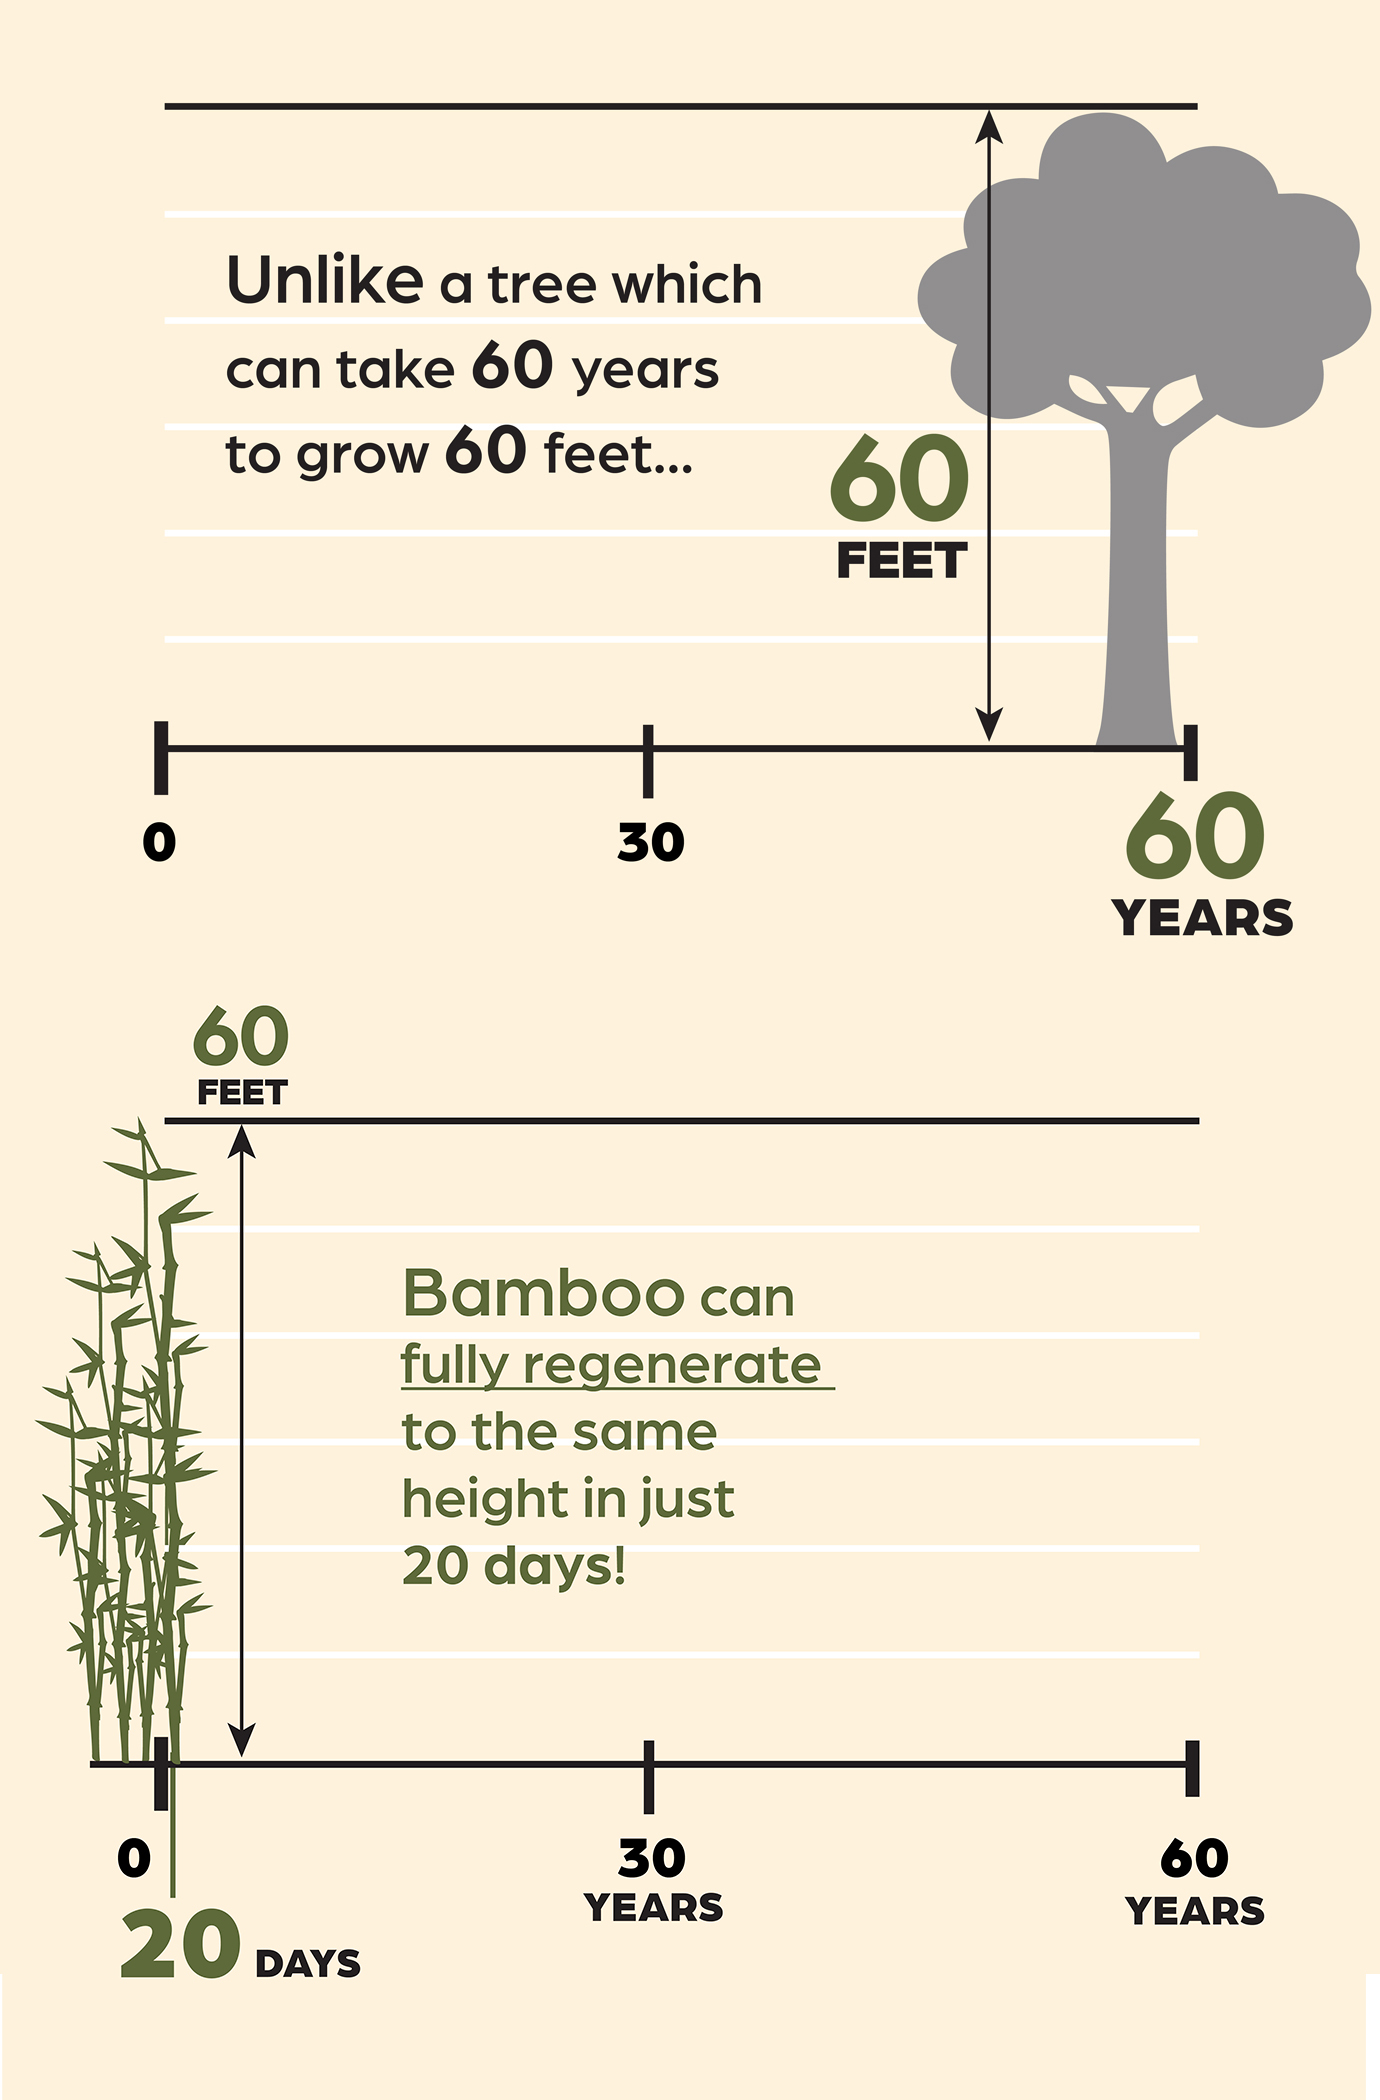 Unlike a tree which can take 60 years to grow 60 feet, bamboo can fully regenerate to the same height in just 20 days.